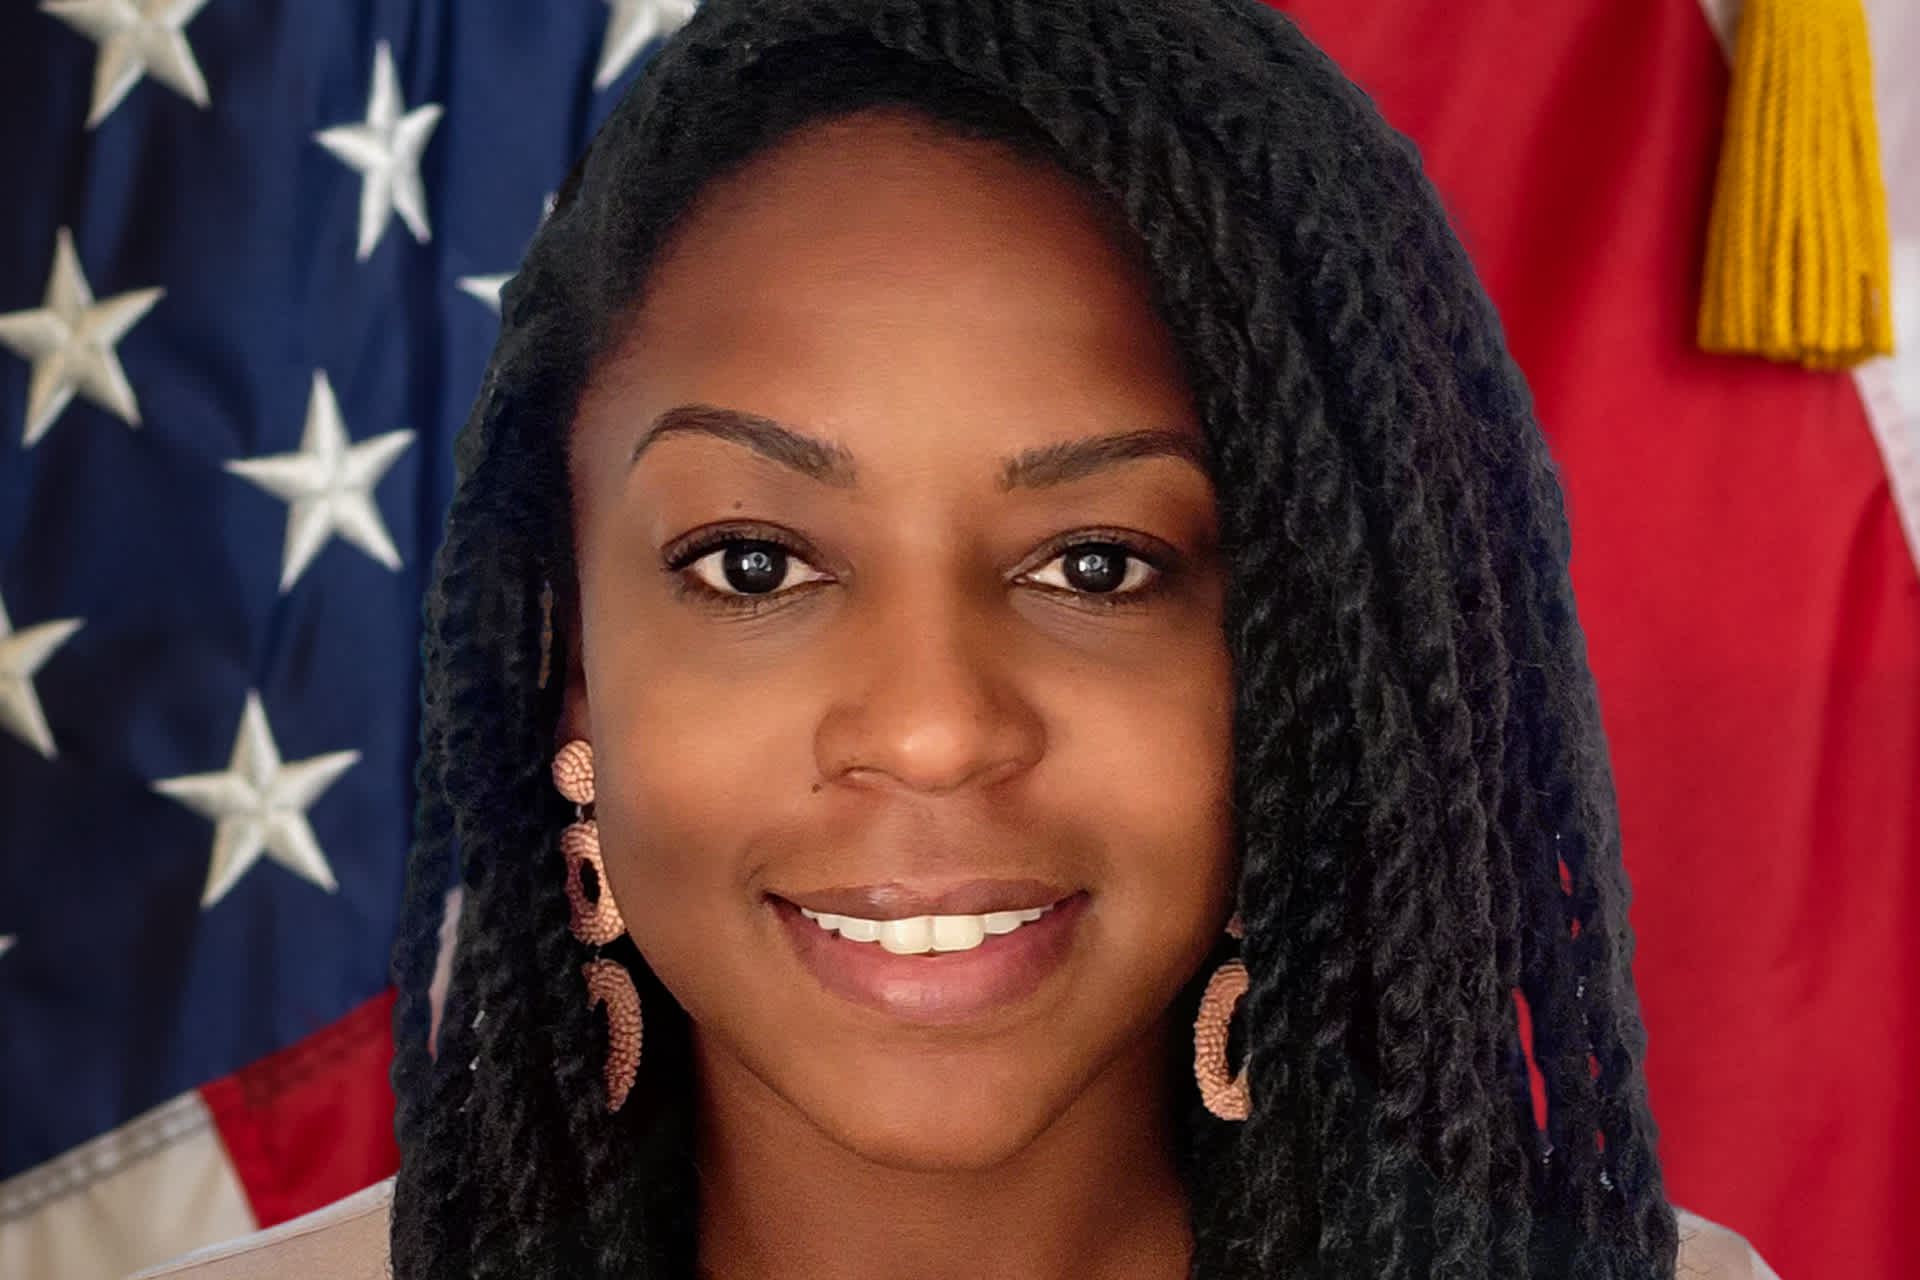 Photo of a Black woman with long hair posing against the American flag